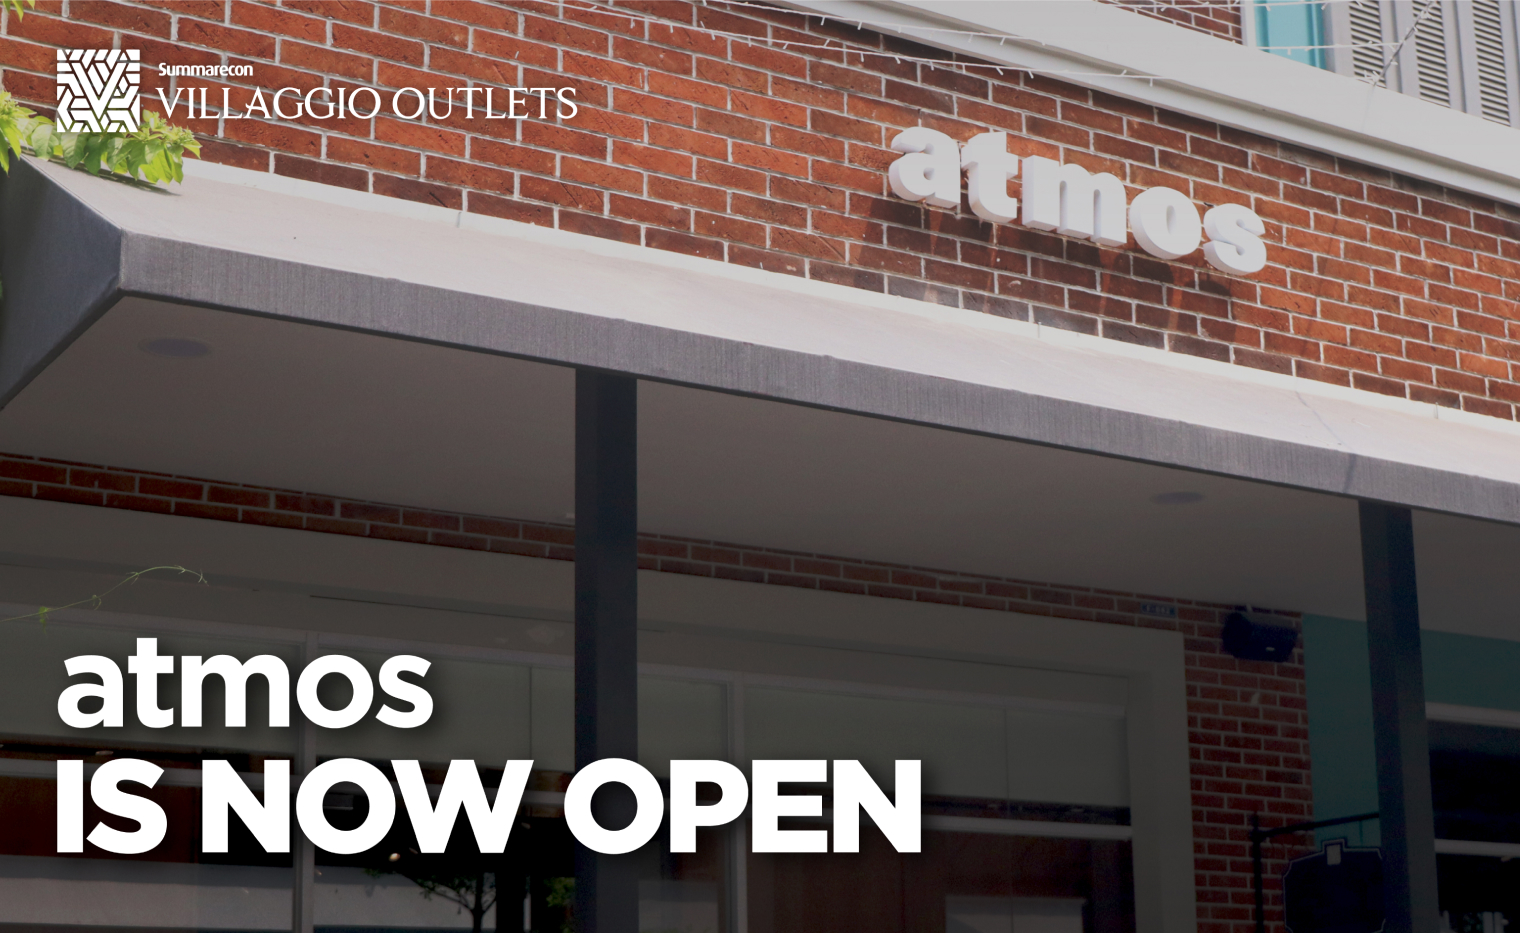 step into sneAkers pArAdise, Atmos hAs Arrived At villAggio outlets!